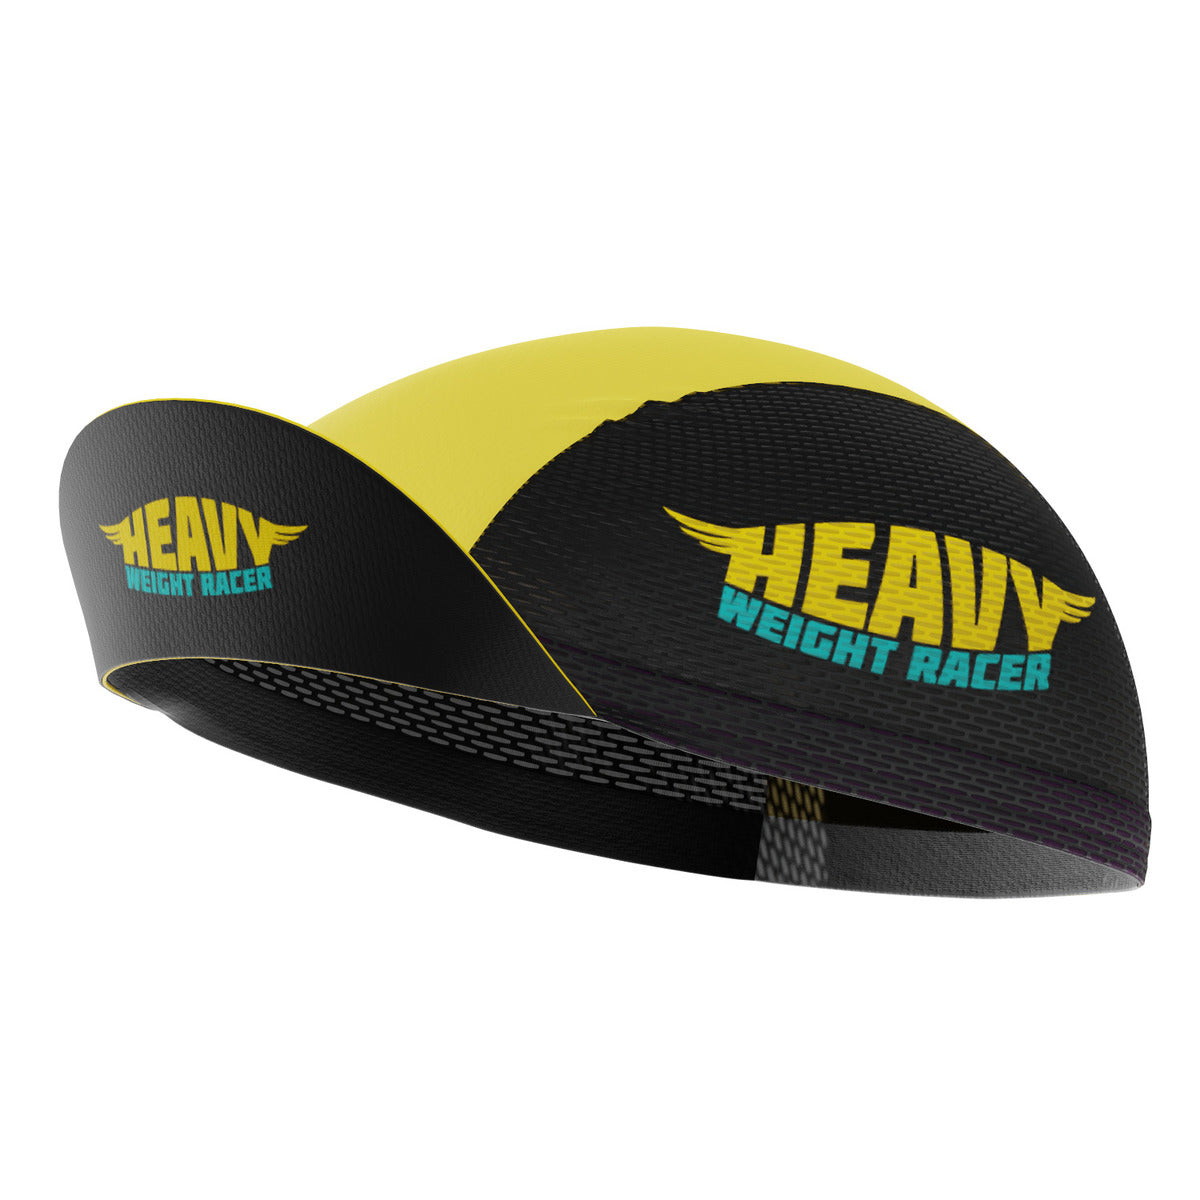 Unisex Heavy Weight Racer Quick Dry Cycling Cap